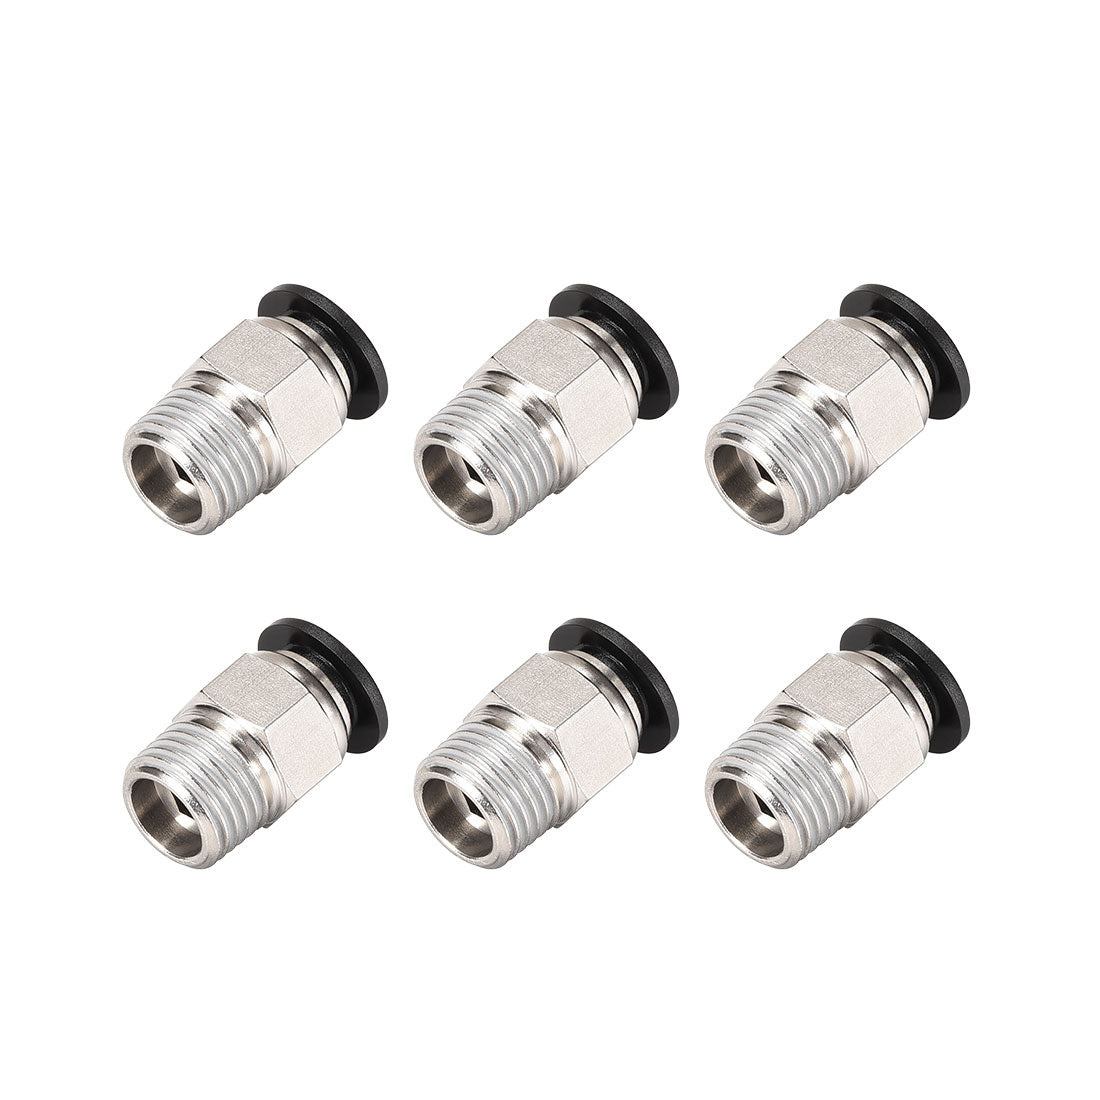 uxcell Uxcell Straight Pneumatic Push to Quick Connect Fittings 1/4NPT Male x 8mm Tube OD Silver Tone 6pcs